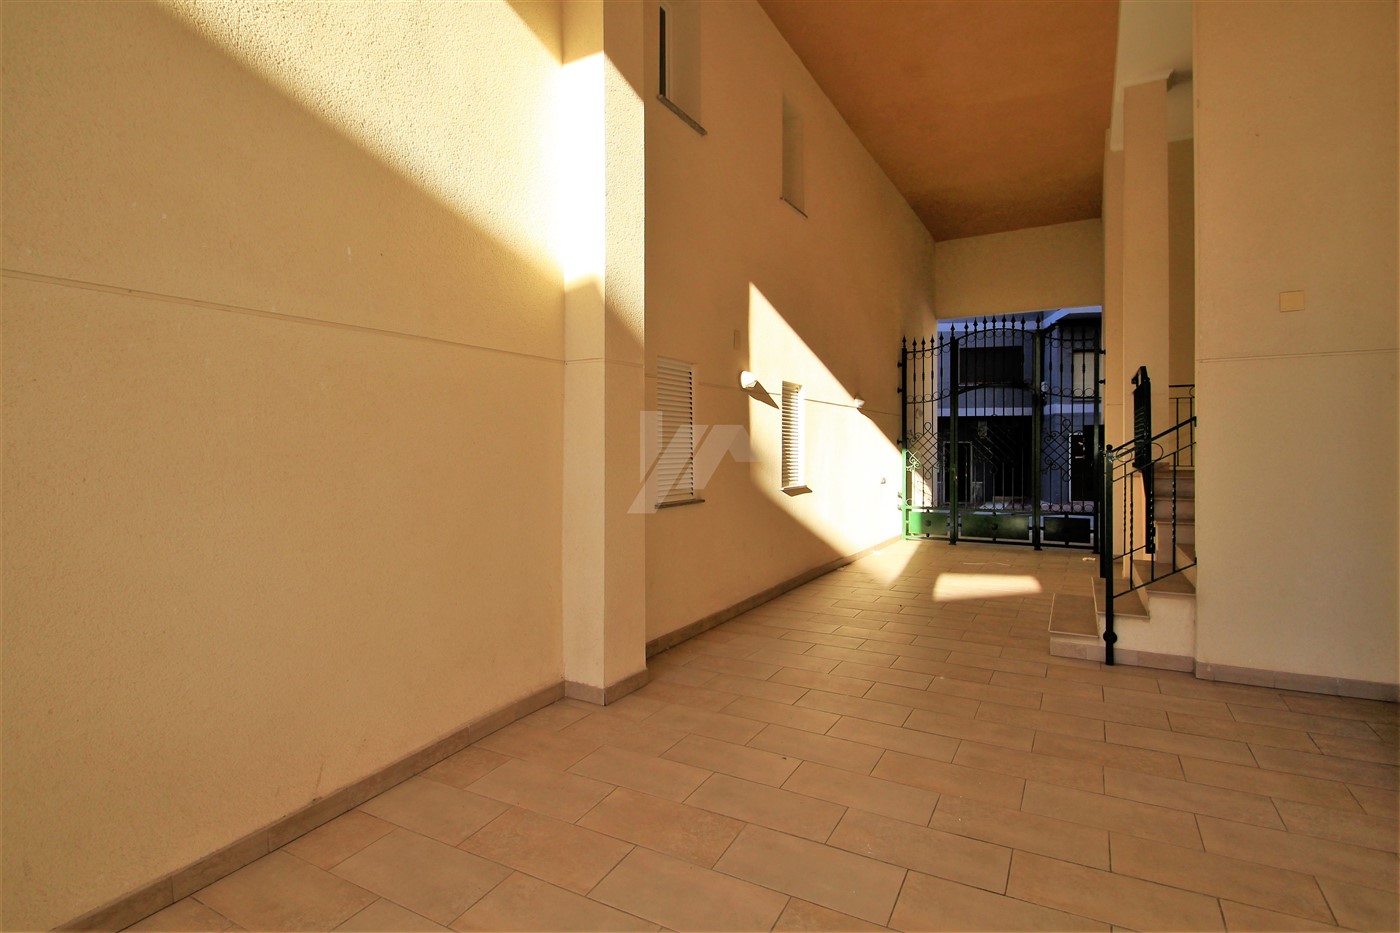 Flat for sale in the centre of Teulada, Costa Blanca.